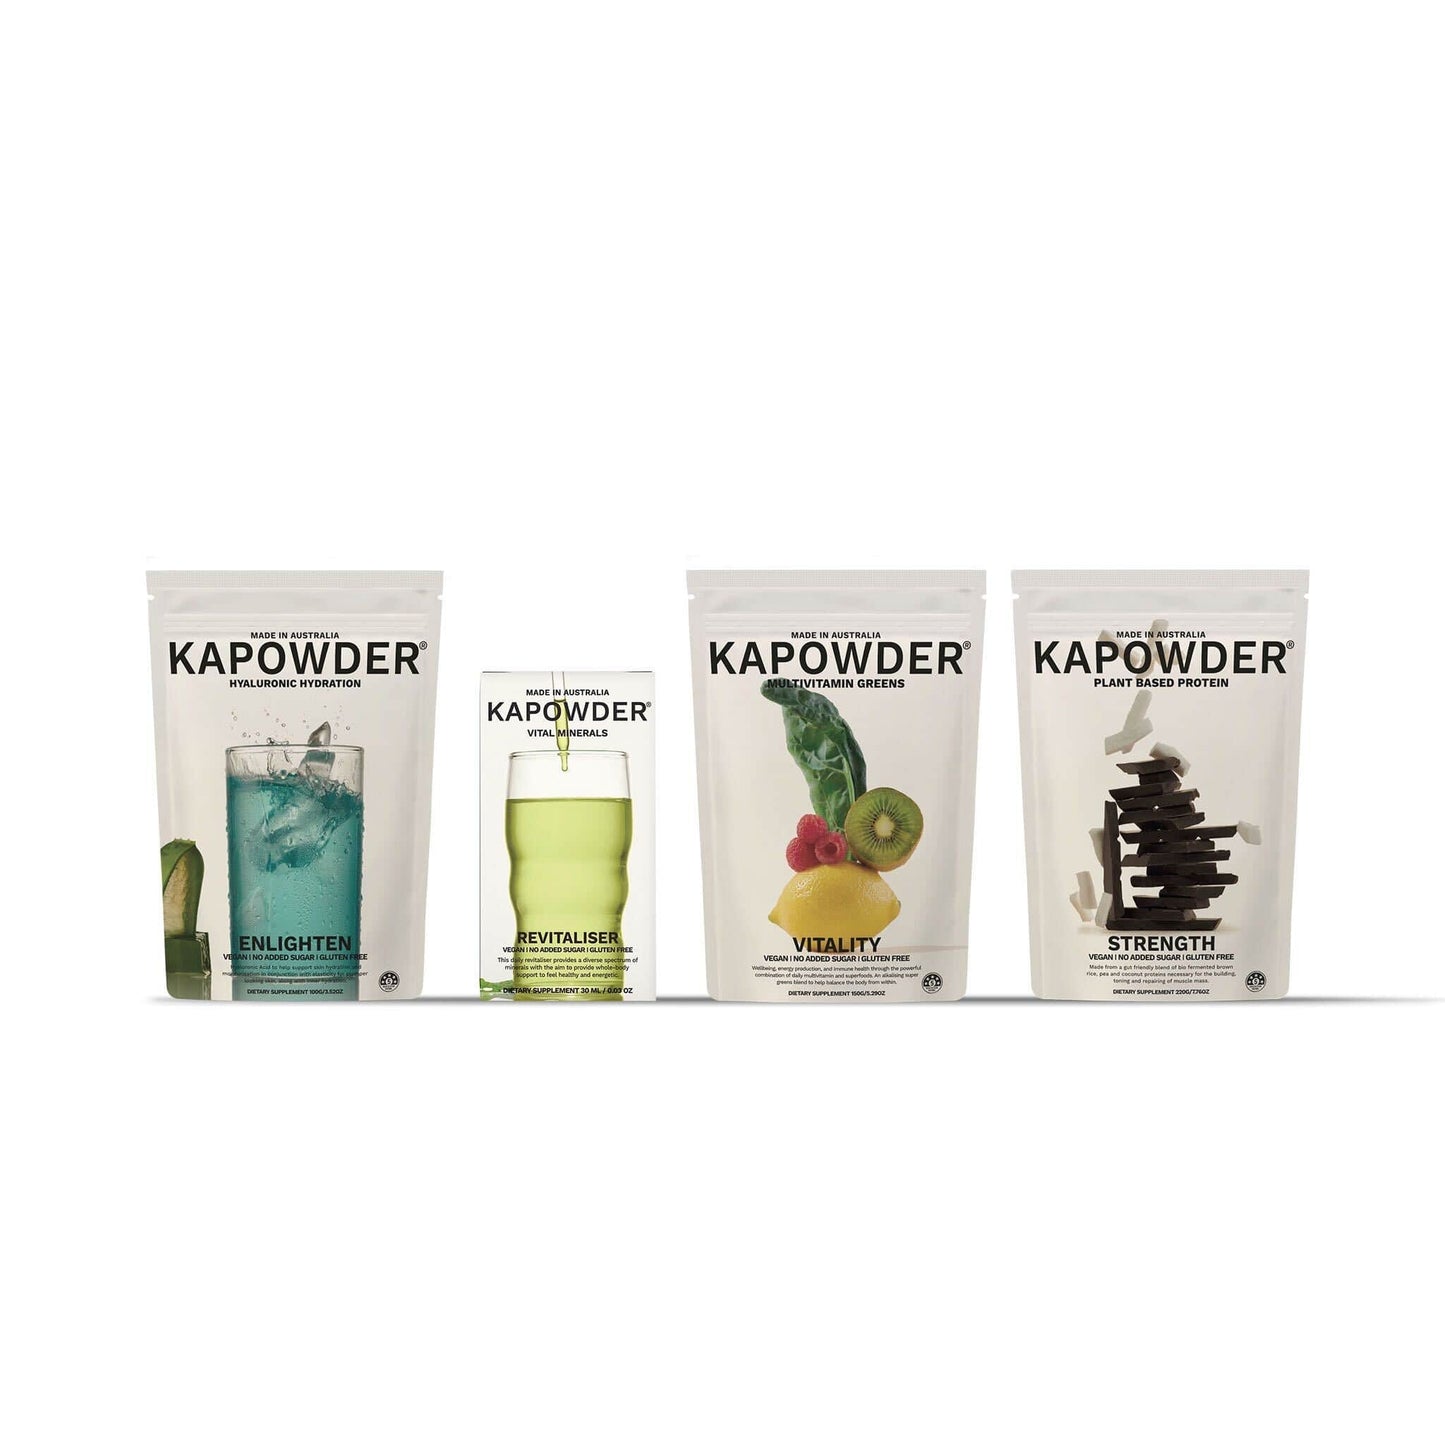 KAPOWDER® BUNDLE VITALITY | Matcha-Infused Daily Greens Multivitamin Powder + ENLIGHTEN | Electrolyte Powder with Ingestible Hyaluronic Acid + REVITALISER | Concentrated Essential Mineral Formula + STRENGTH | Vegan-Friendly Protein Powder ENERGY BUNDLE - VITALITY + REVITALISER + ENLIGHTEN + STRENGTH